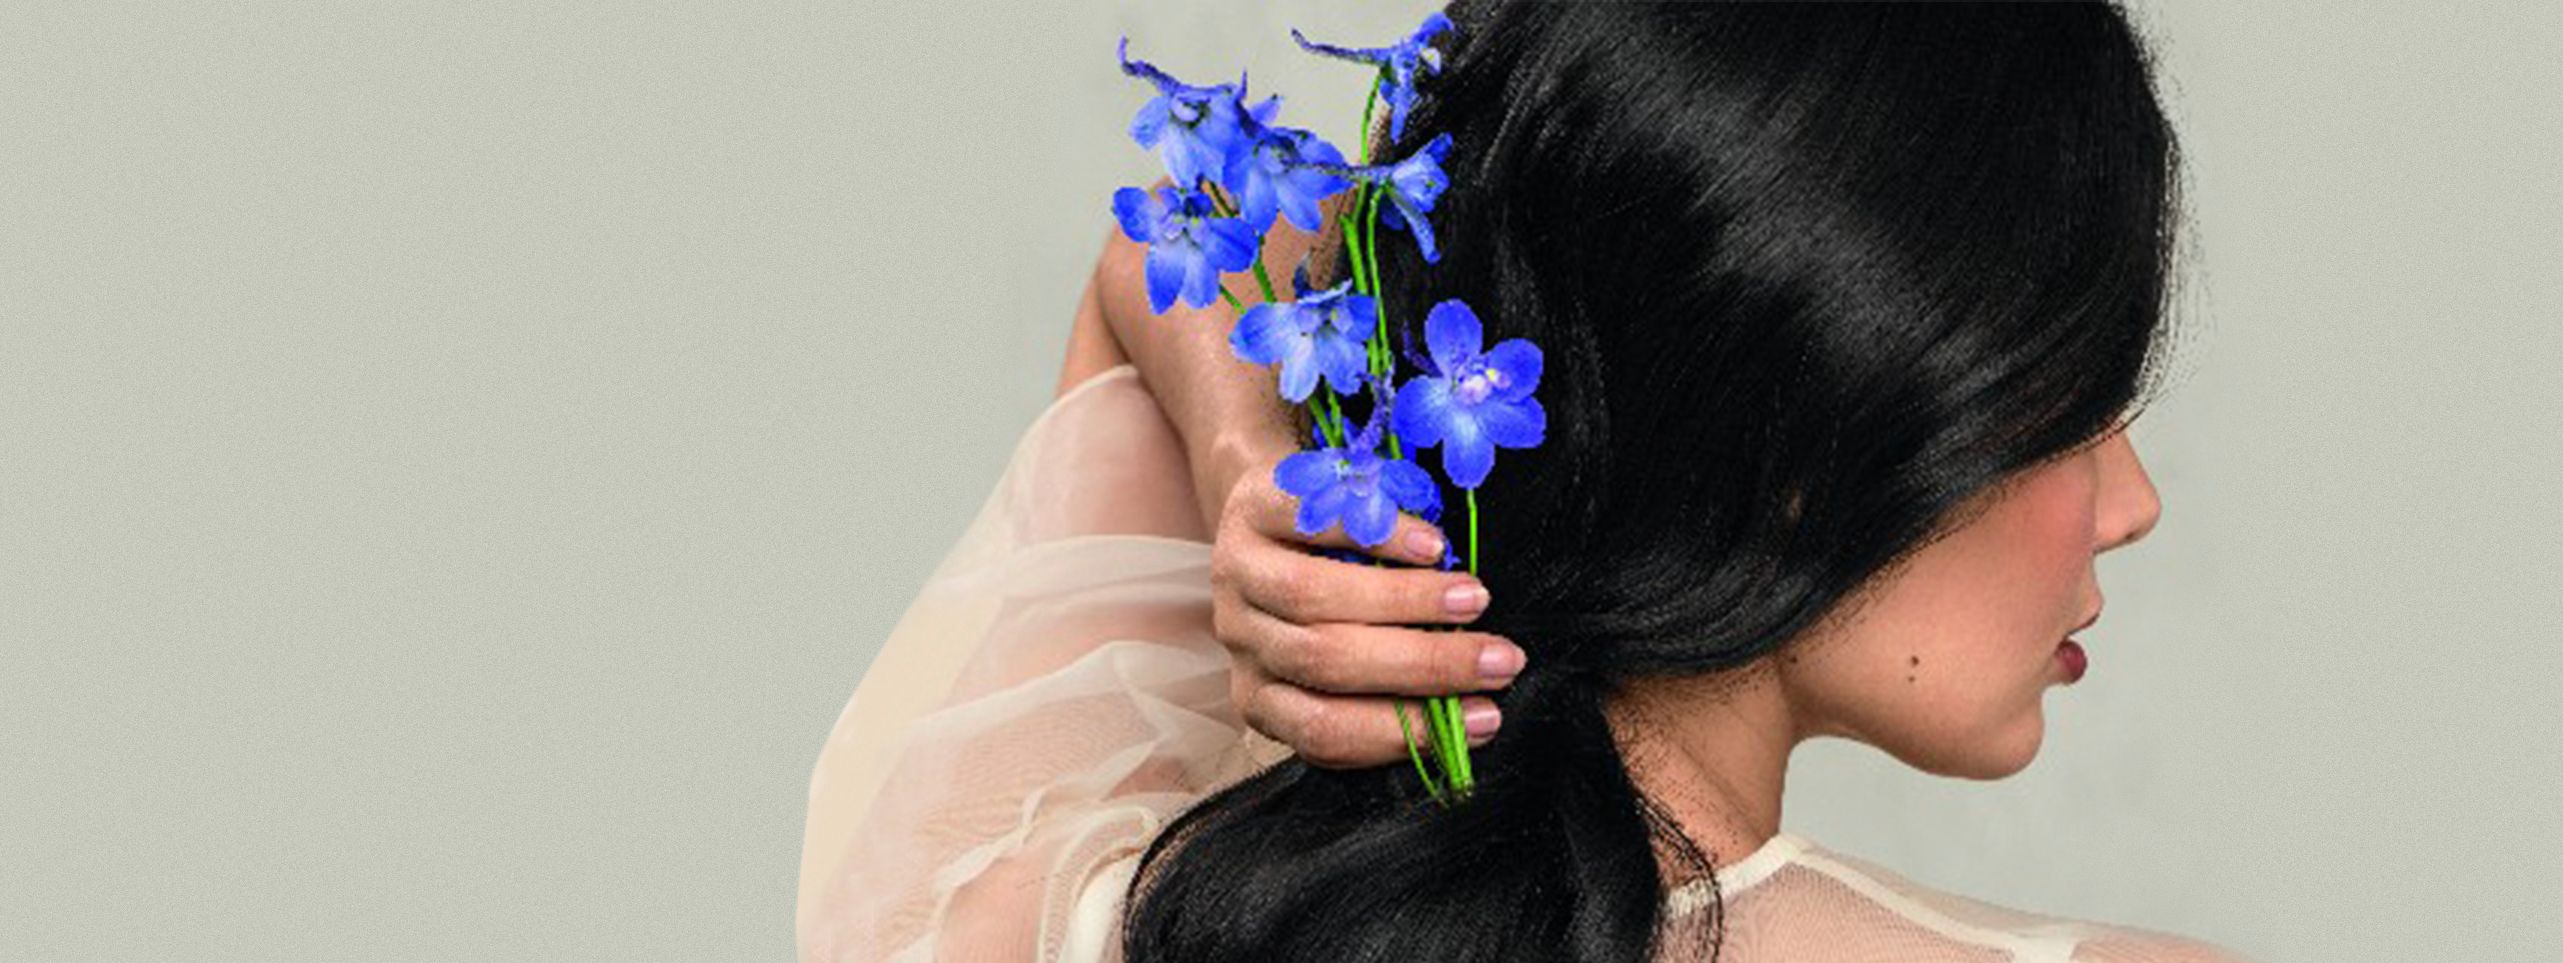 Flowers in Your Hair: Floral Accessories for Special Occasions or Every Day